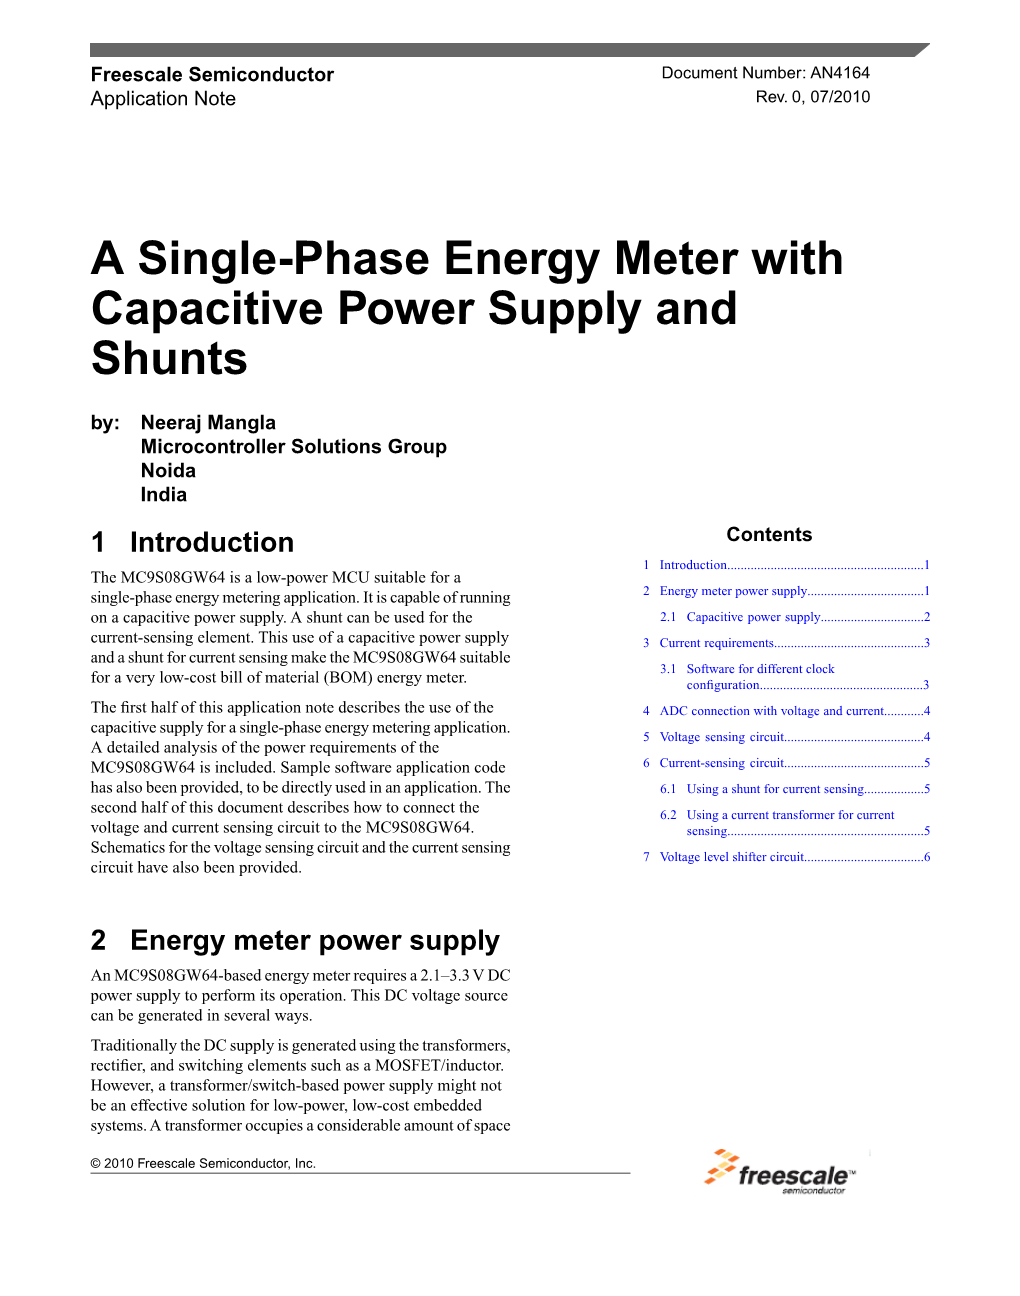 A Single-Phase Energy Meter with Capacitive Power Supply and Shunts